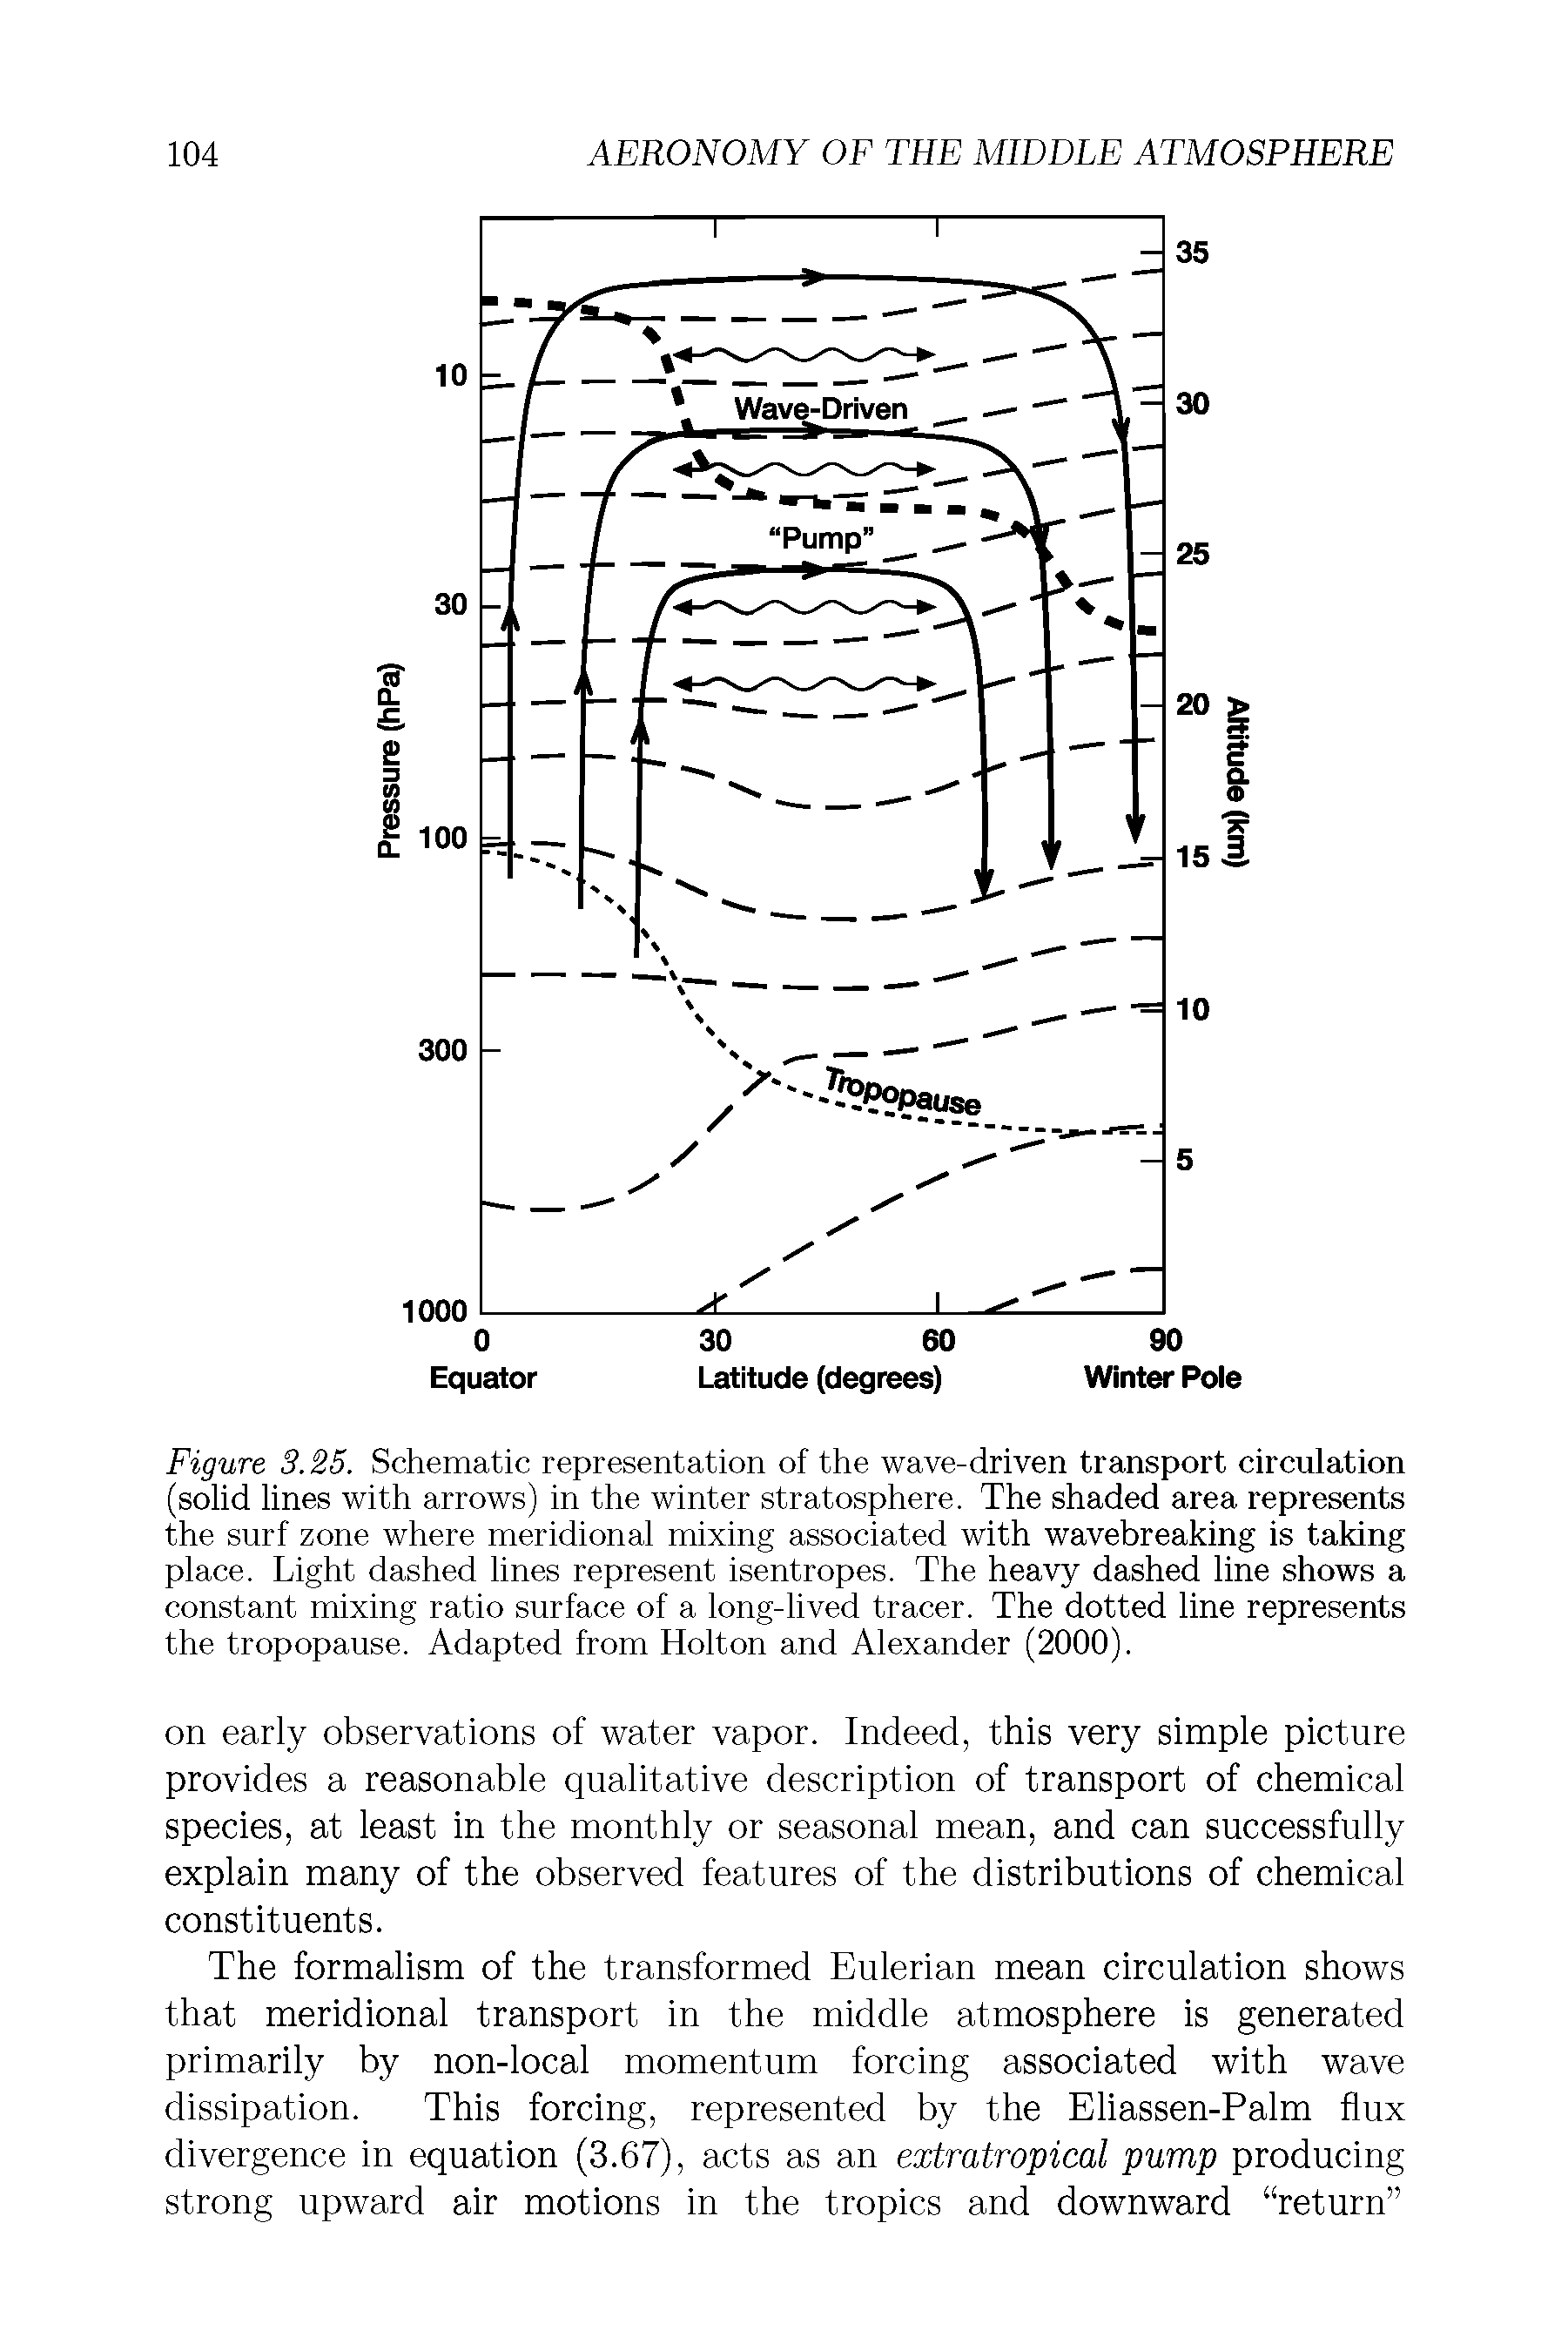 Figure 3.25. Schematic representation of the wave-driven transport circulation (solid lines with arrows) in the winter stratosphere. The shaded area represents the surf zone where meridional mixing associated with wavebreaking is taking place. Light dashed lines represent isentropes. The heavy dashed line shows a constant mixing ratio surface of a long-lived tracer. The dotted line represents the tropopause. Adapted from Holton and Alexander (2000).